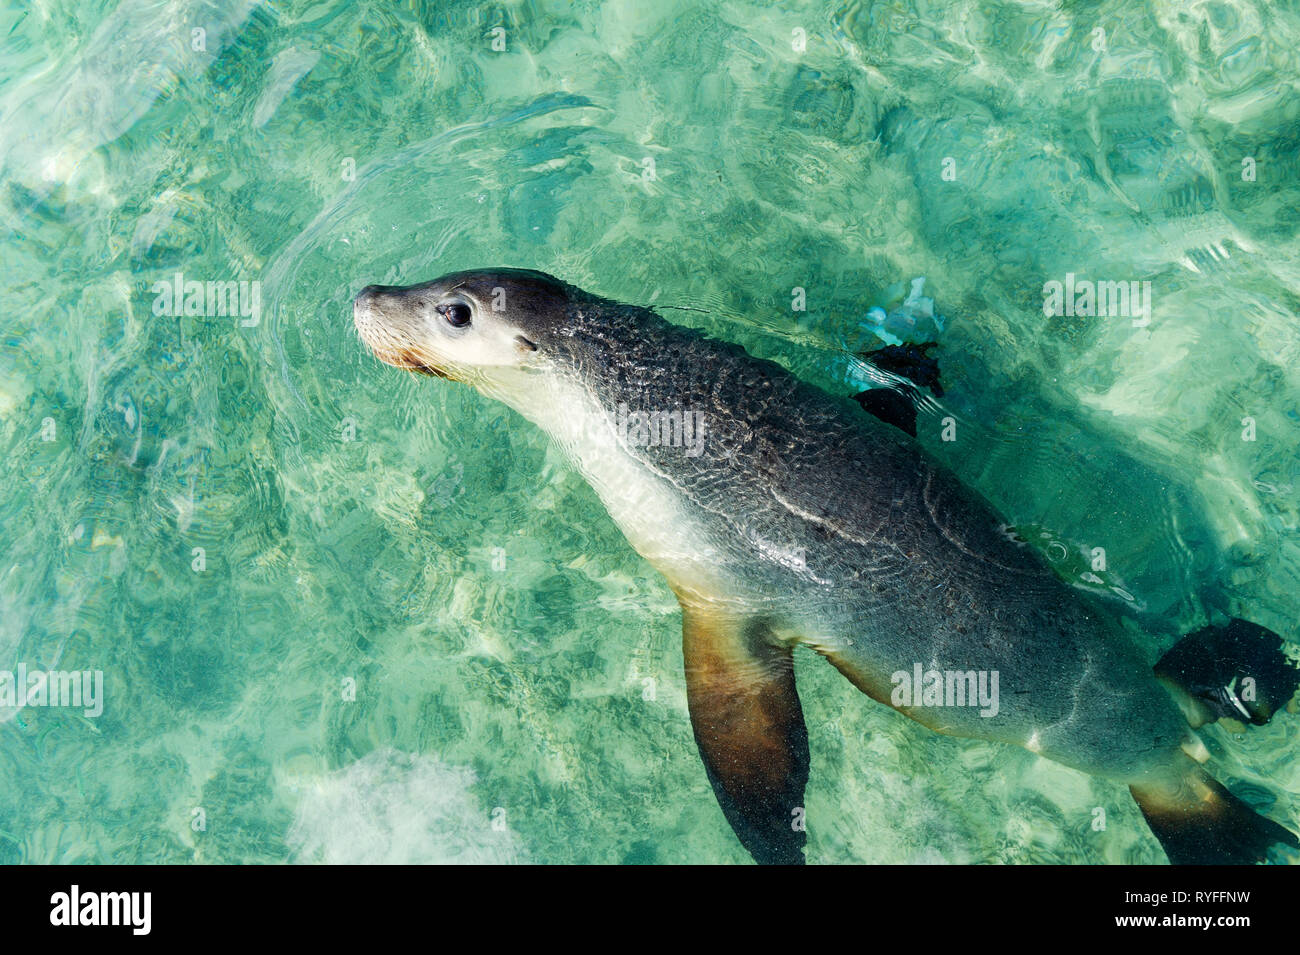 A Sea Lion on Big Rat Island, Houtman Abrolhos. The Houtman Abrolhos islands lie 60 kilometres off the coast of Geraldton in Western Australia. There  Stock Photo